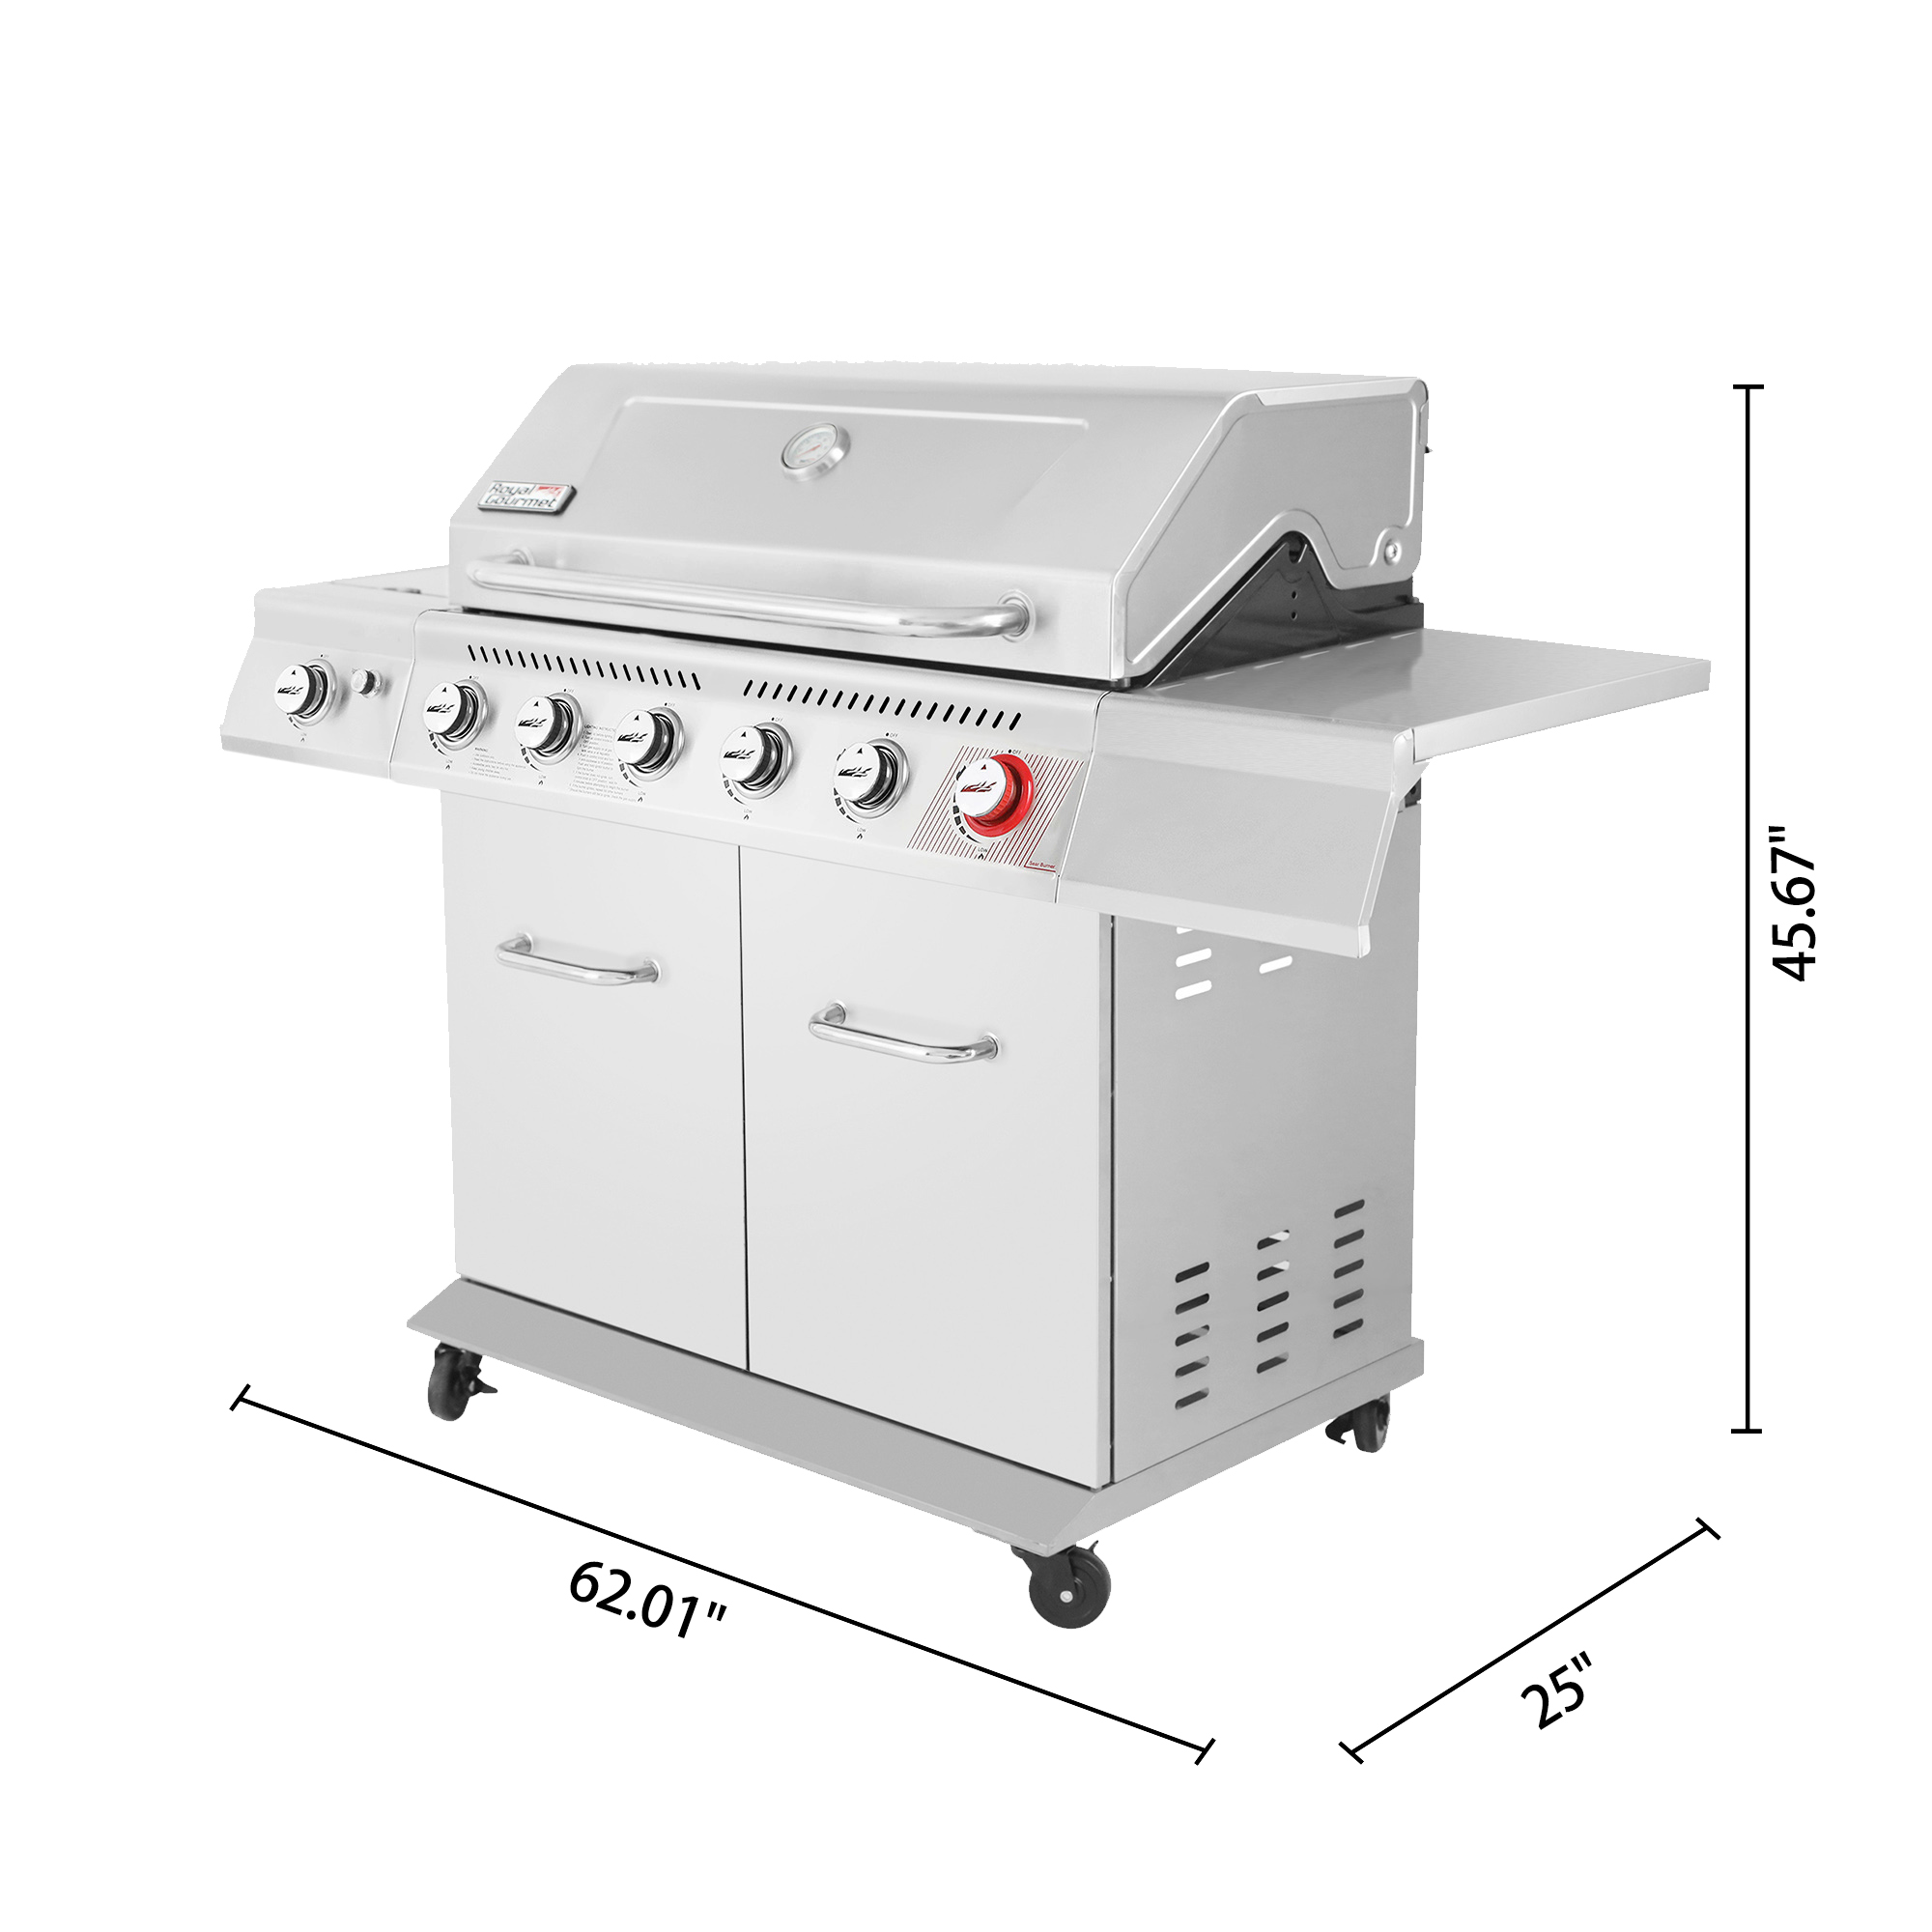 Royal Gourmet GA6402S Stainless Steel Gas Grill, Premier 6-Burner BBQ Grill with Sear Burner and Side Burner, 74,000 BTU, Cabinet Style, Outdoor Party Grill, Silver - image 5 of 9